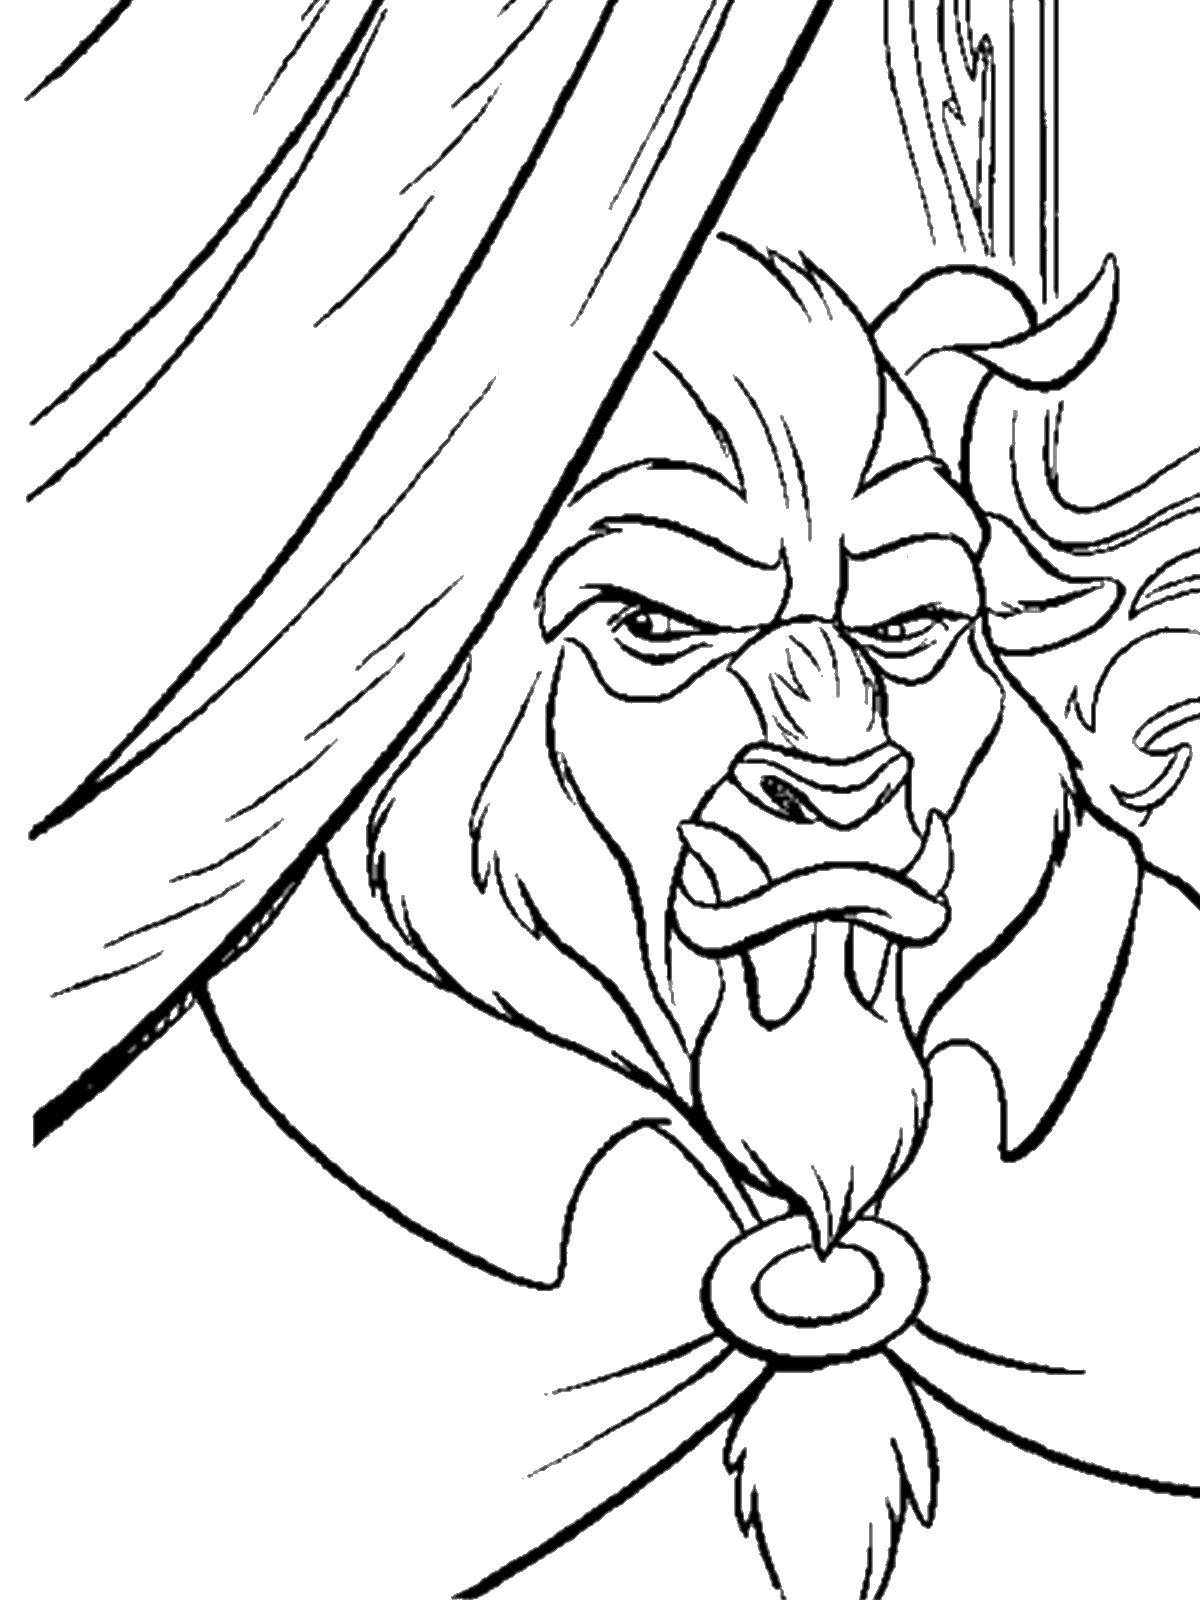 Coloring The beast in anger. Category beauty and the beast. Tags:  beautiful , monster.